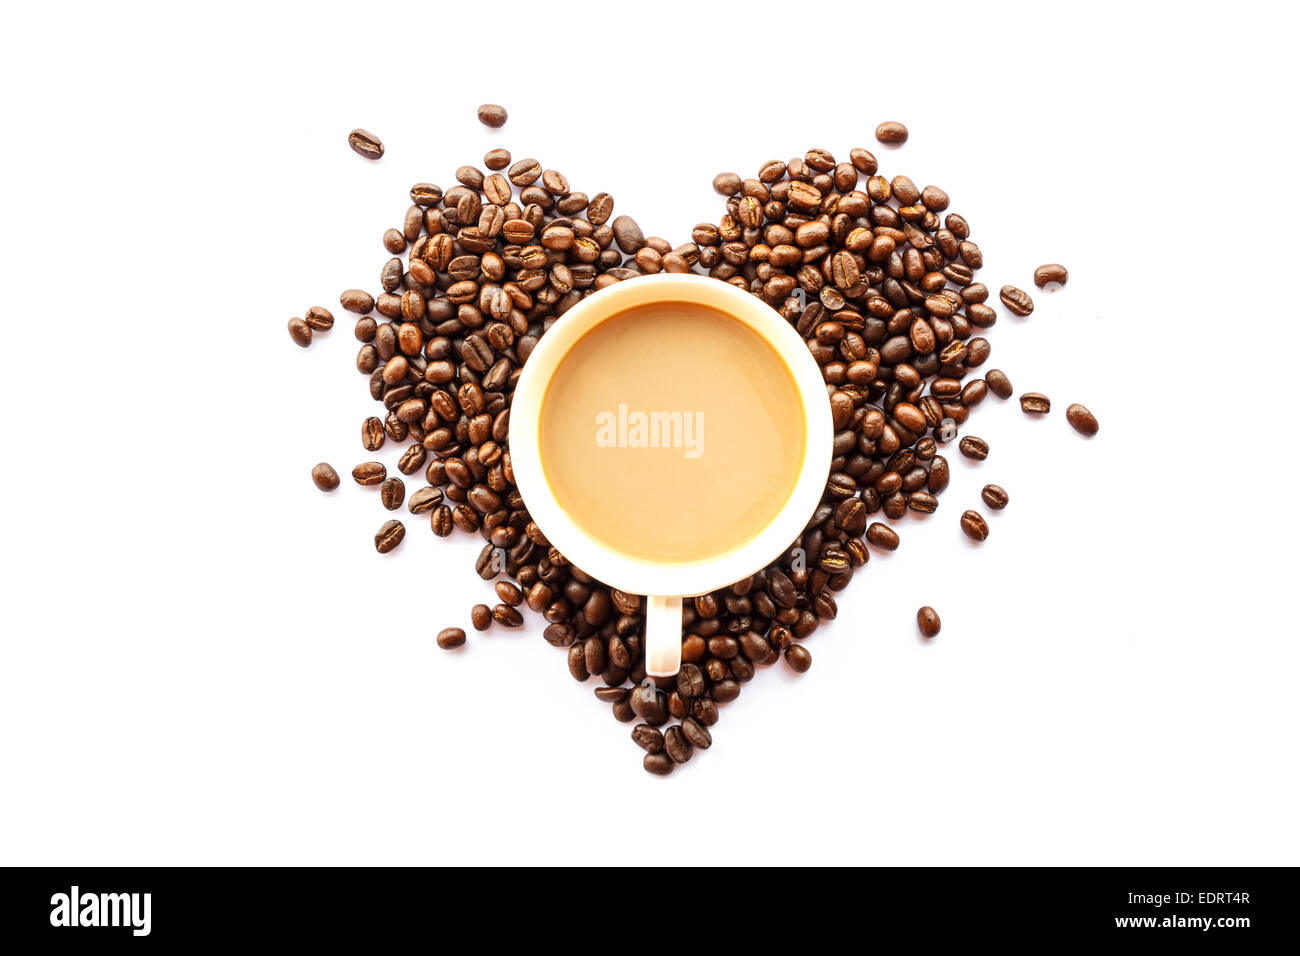 heart shaped of coffee beans and cup on white background(isolated) Stock Photo